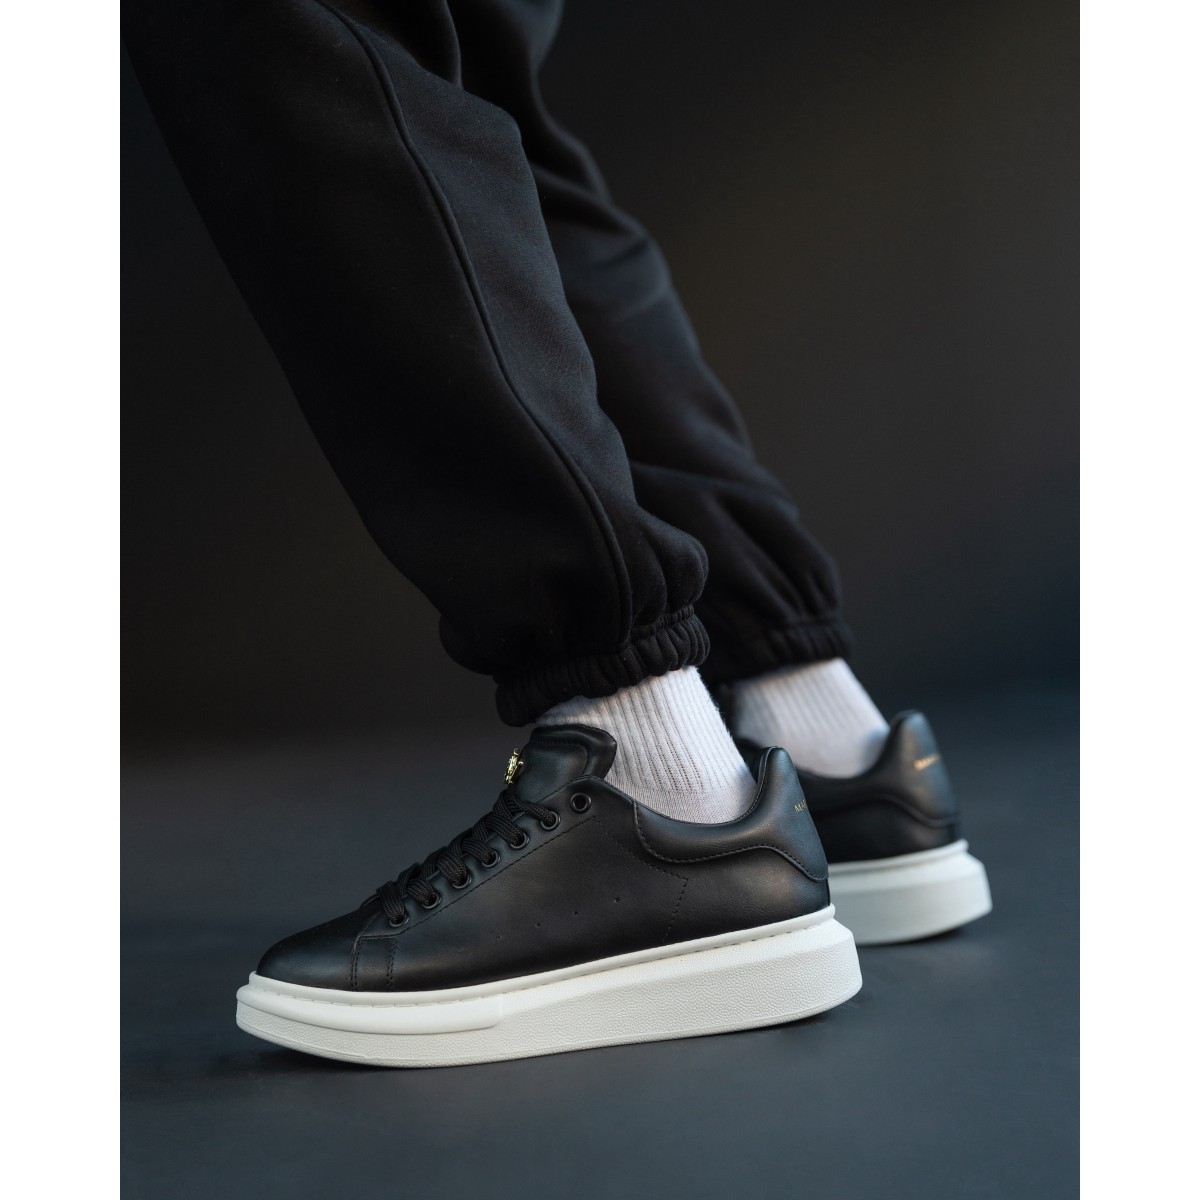 Men’s Crowned Chunky Sneakers Shoes Black | Martin Valen